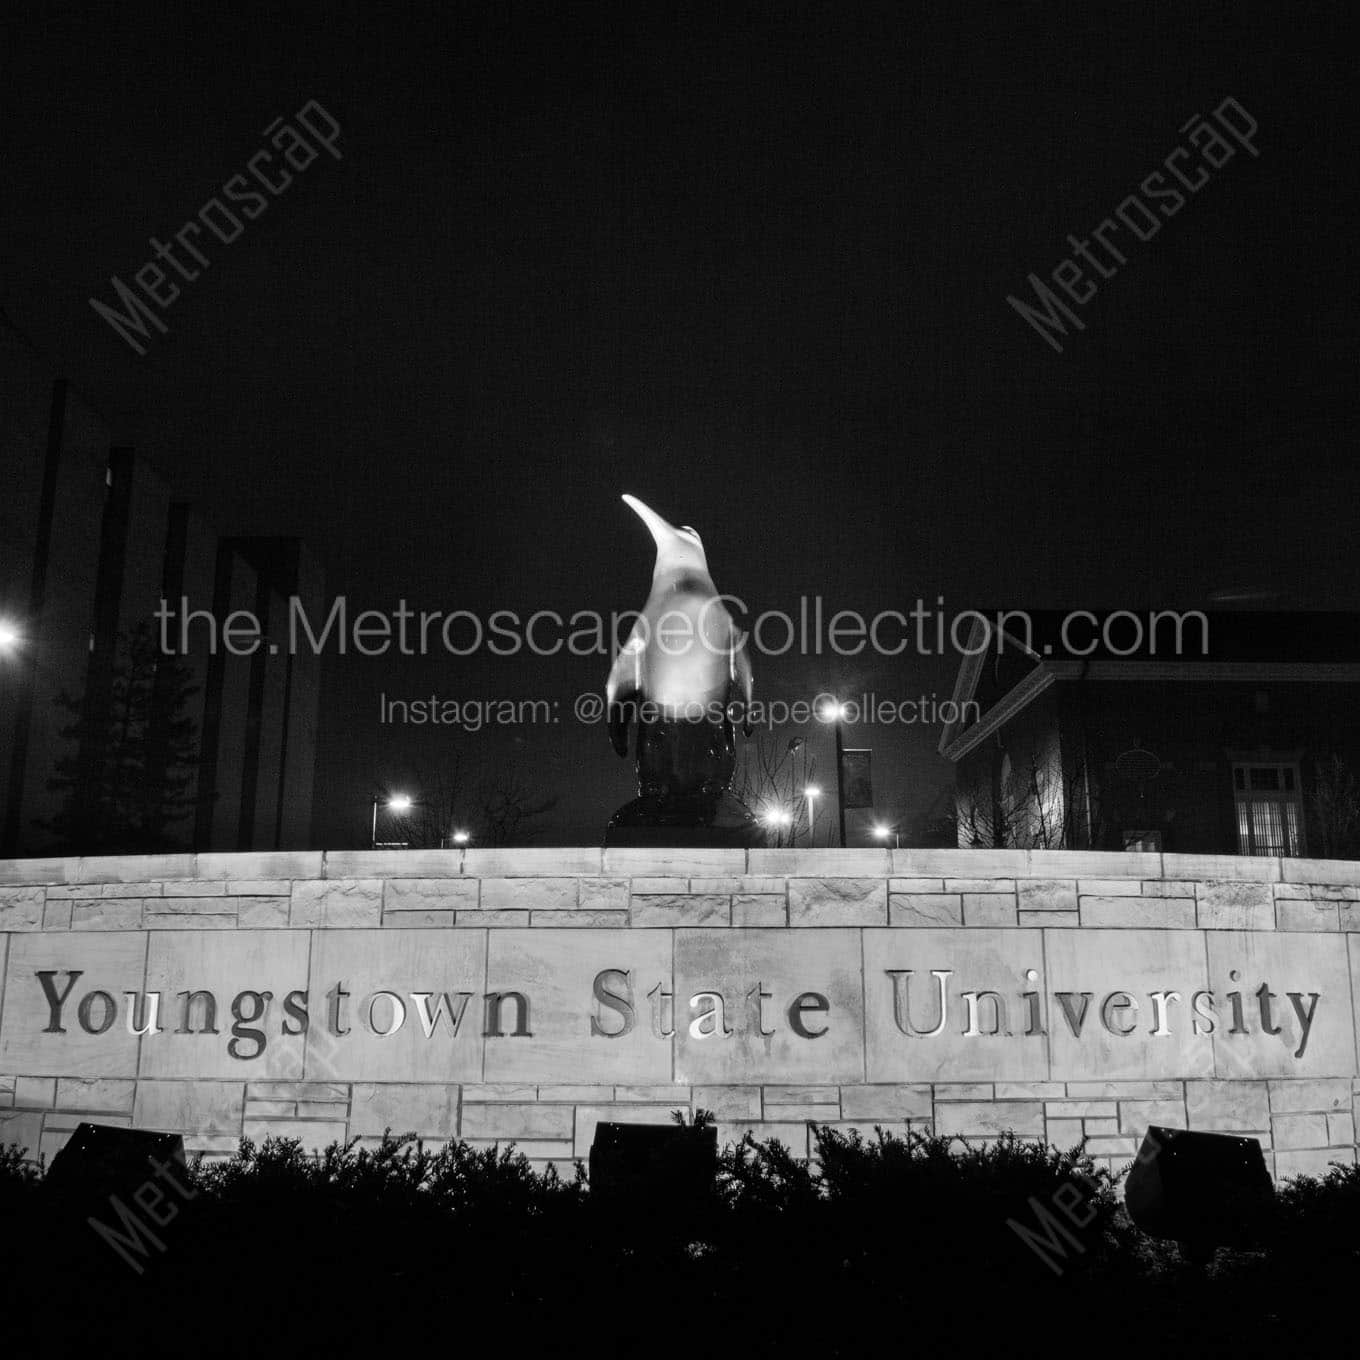 youngstown state university sign at night Black & White Office Art